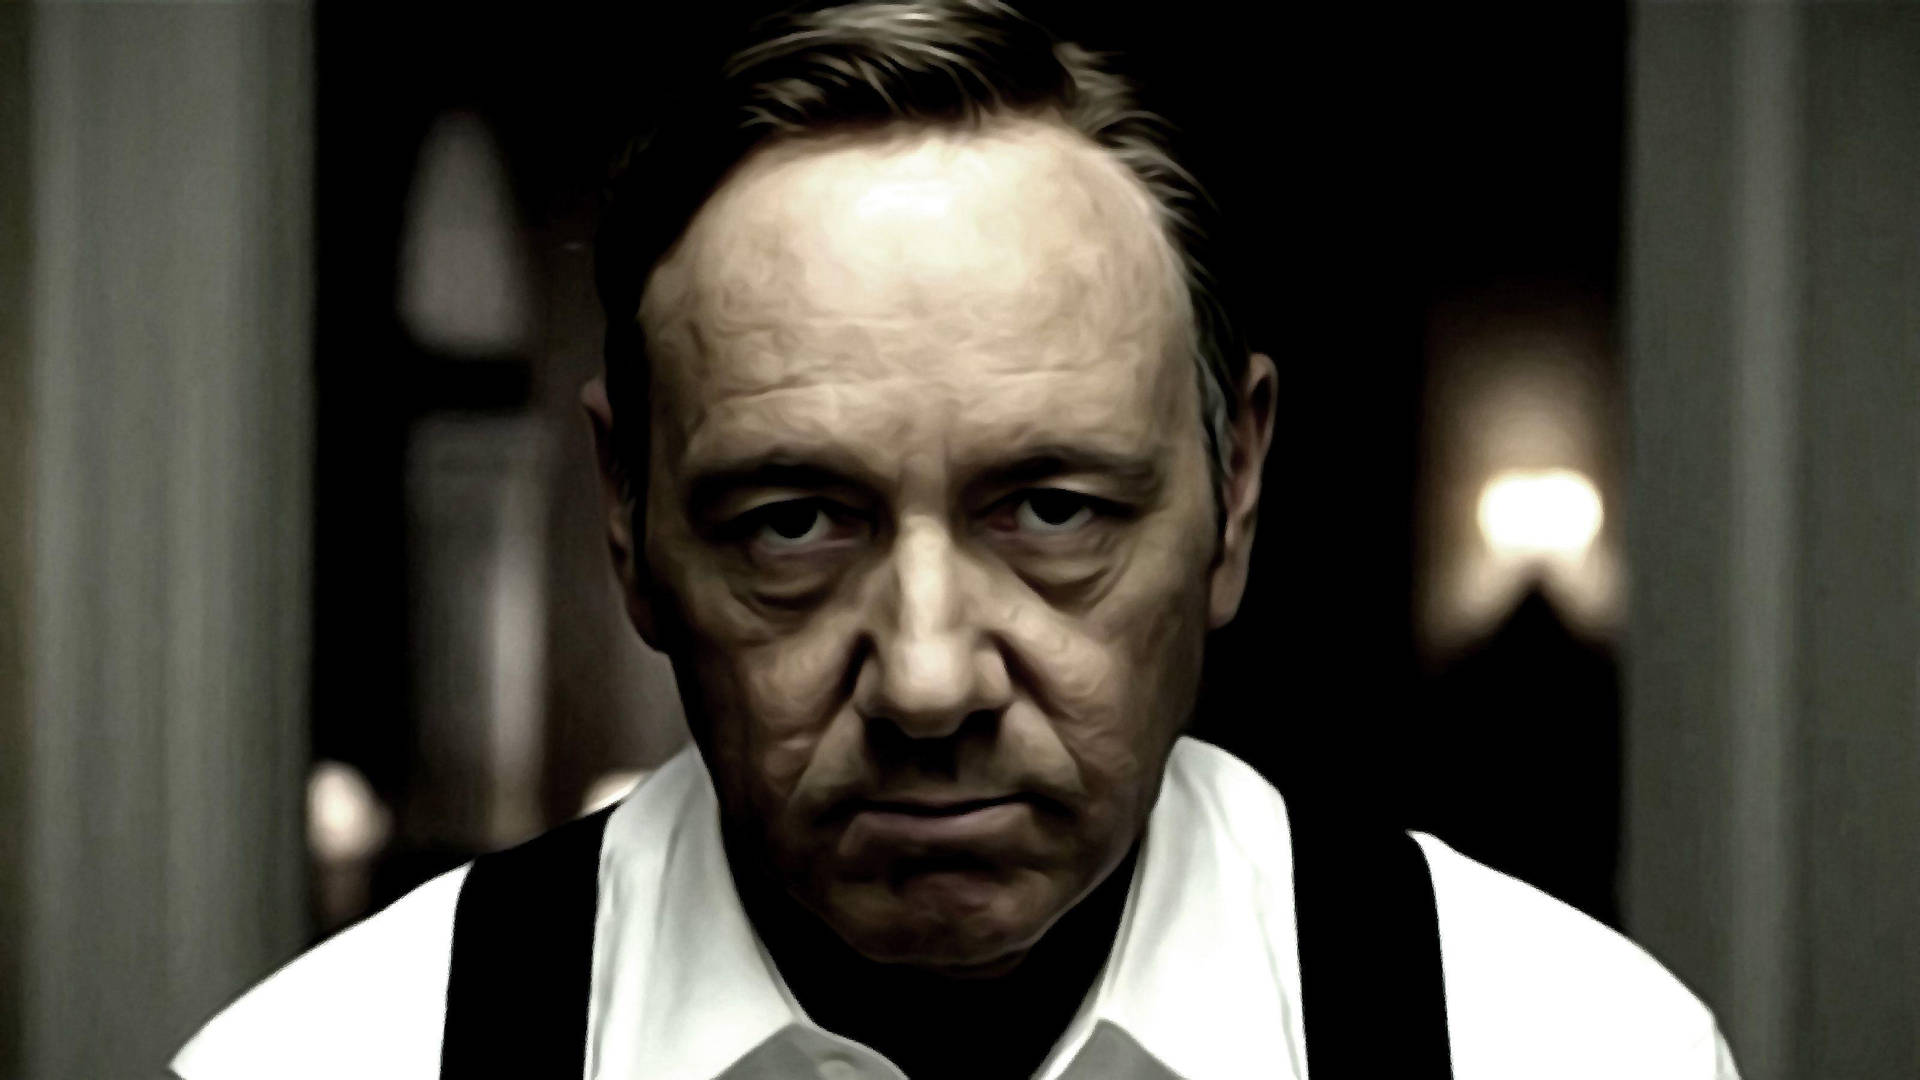 Kevin Spacey Looking Seriously Wallpaper